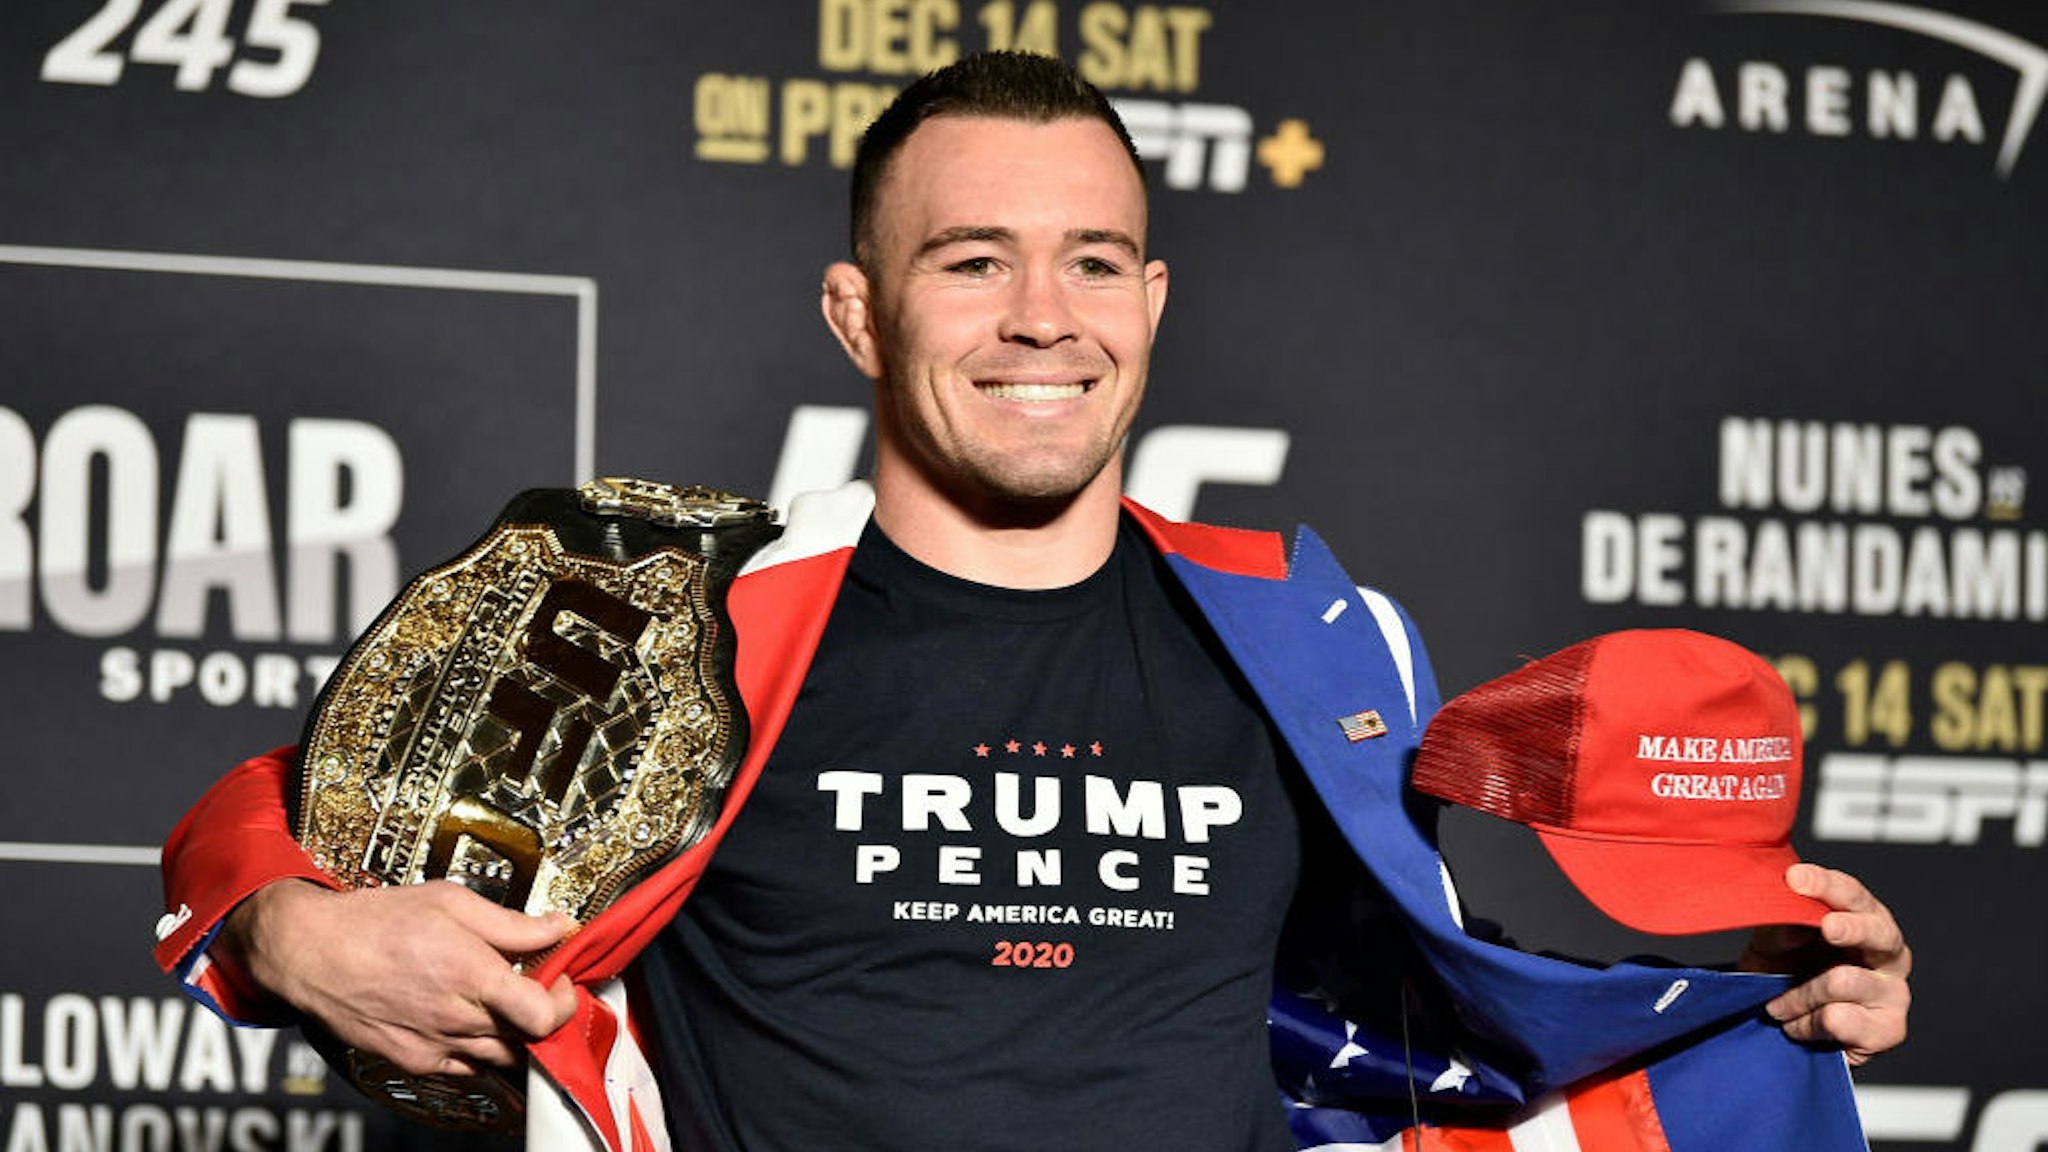 Colby Covington poses for the media during the UFC 245 Ultimate Media Day at the Red Rock Casino Resort on December 12, 2019 in Las Vegas, Nevada. (Photo by Chris Unger/Zuffa LLC via Getty Images)